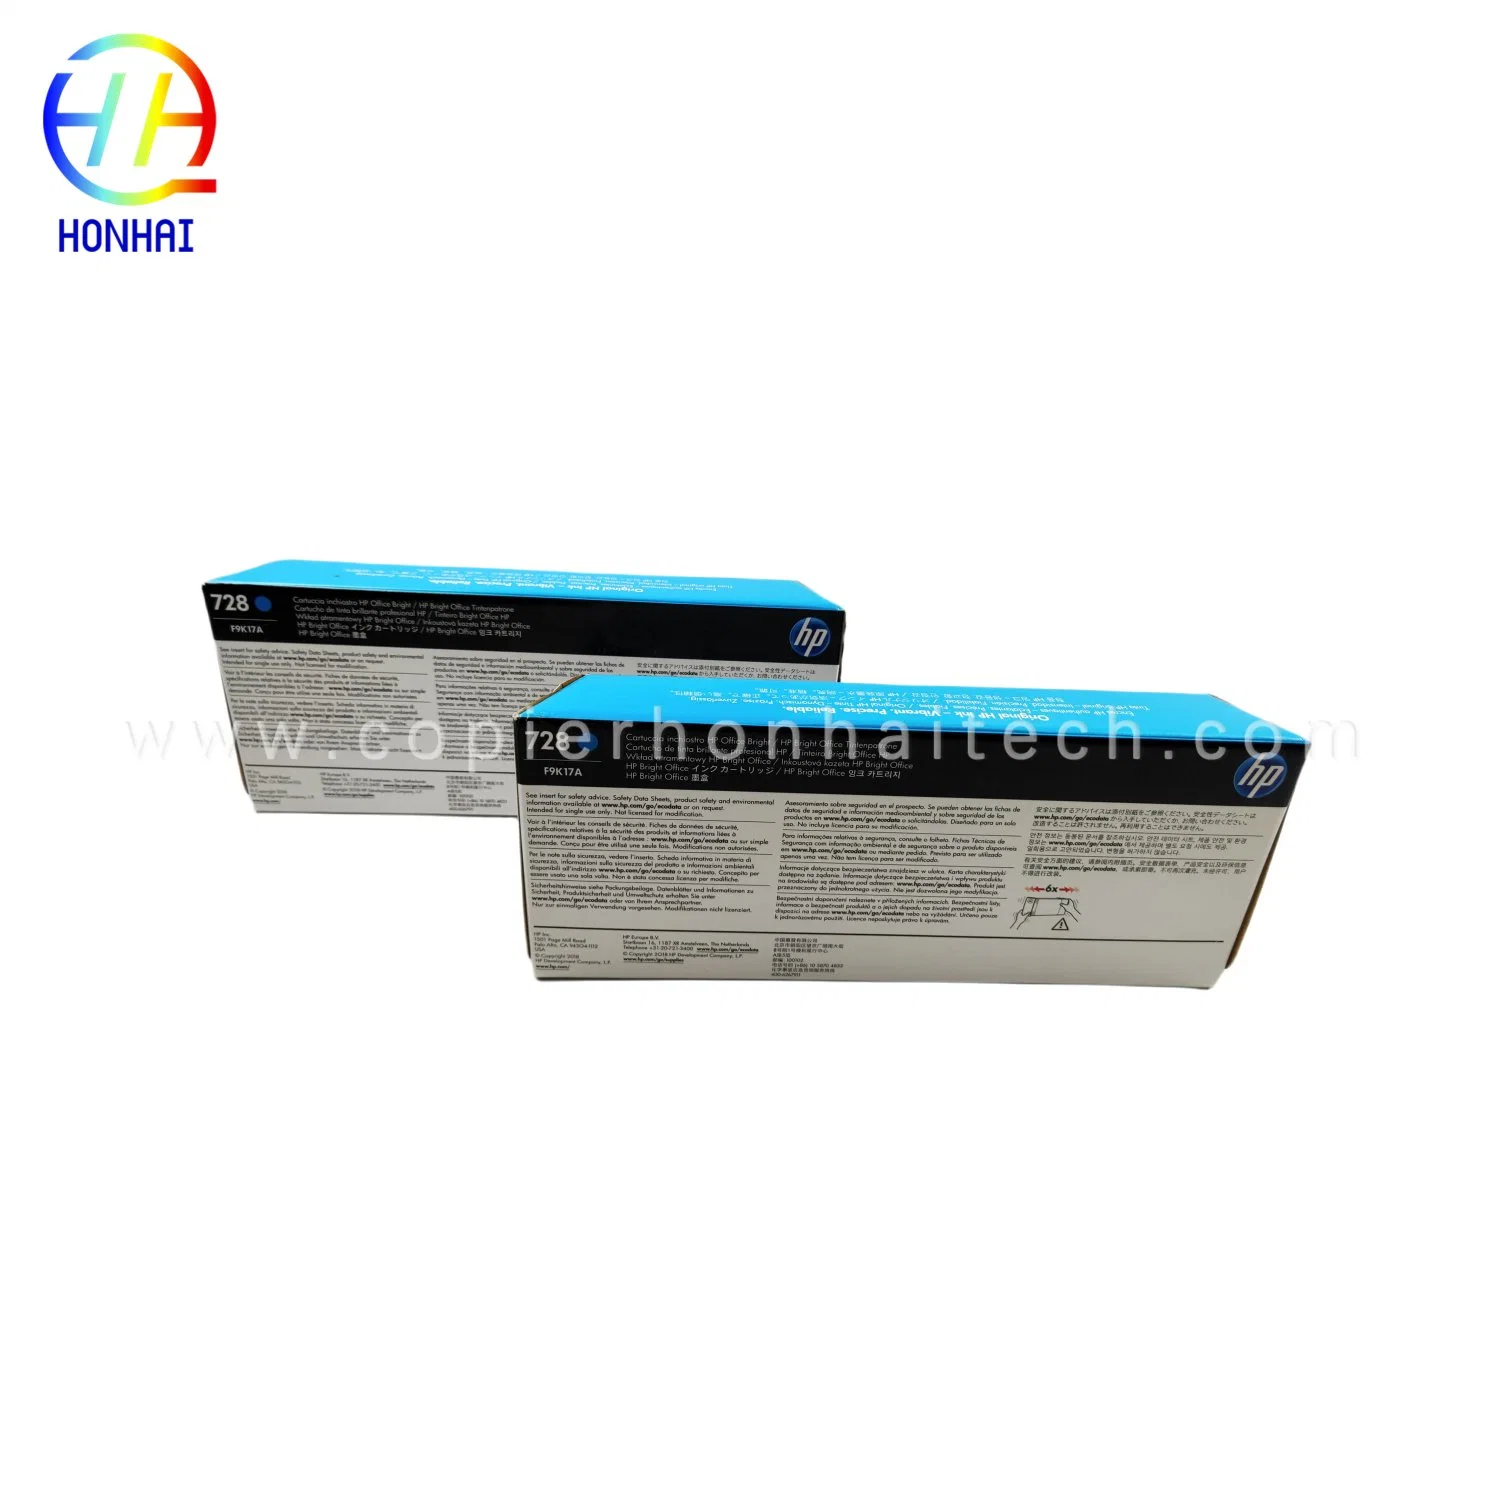 Ink Cartridge for HP Designjet T730 T830